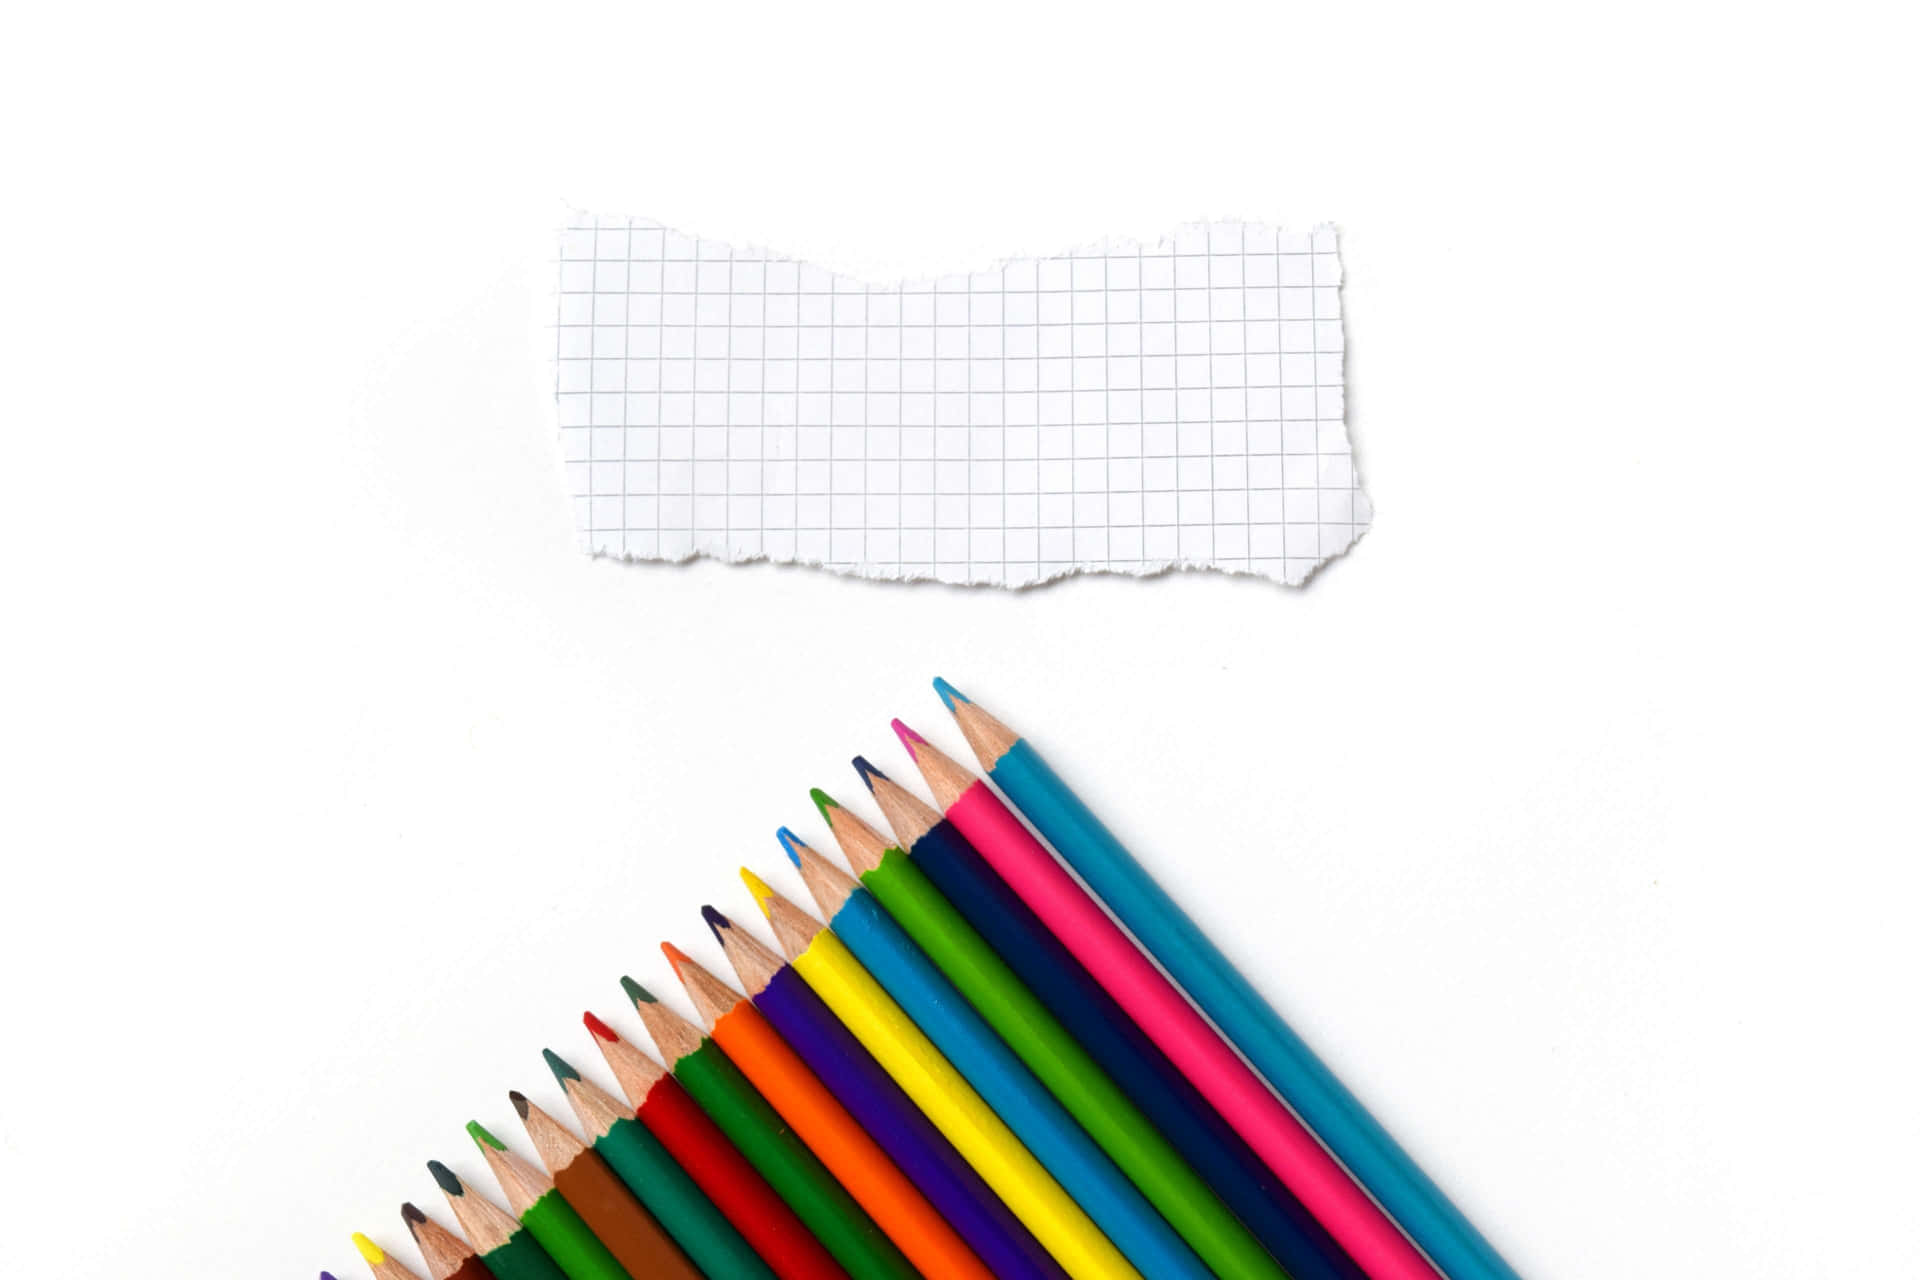 Colorful Pencils With A Piece Of Paper